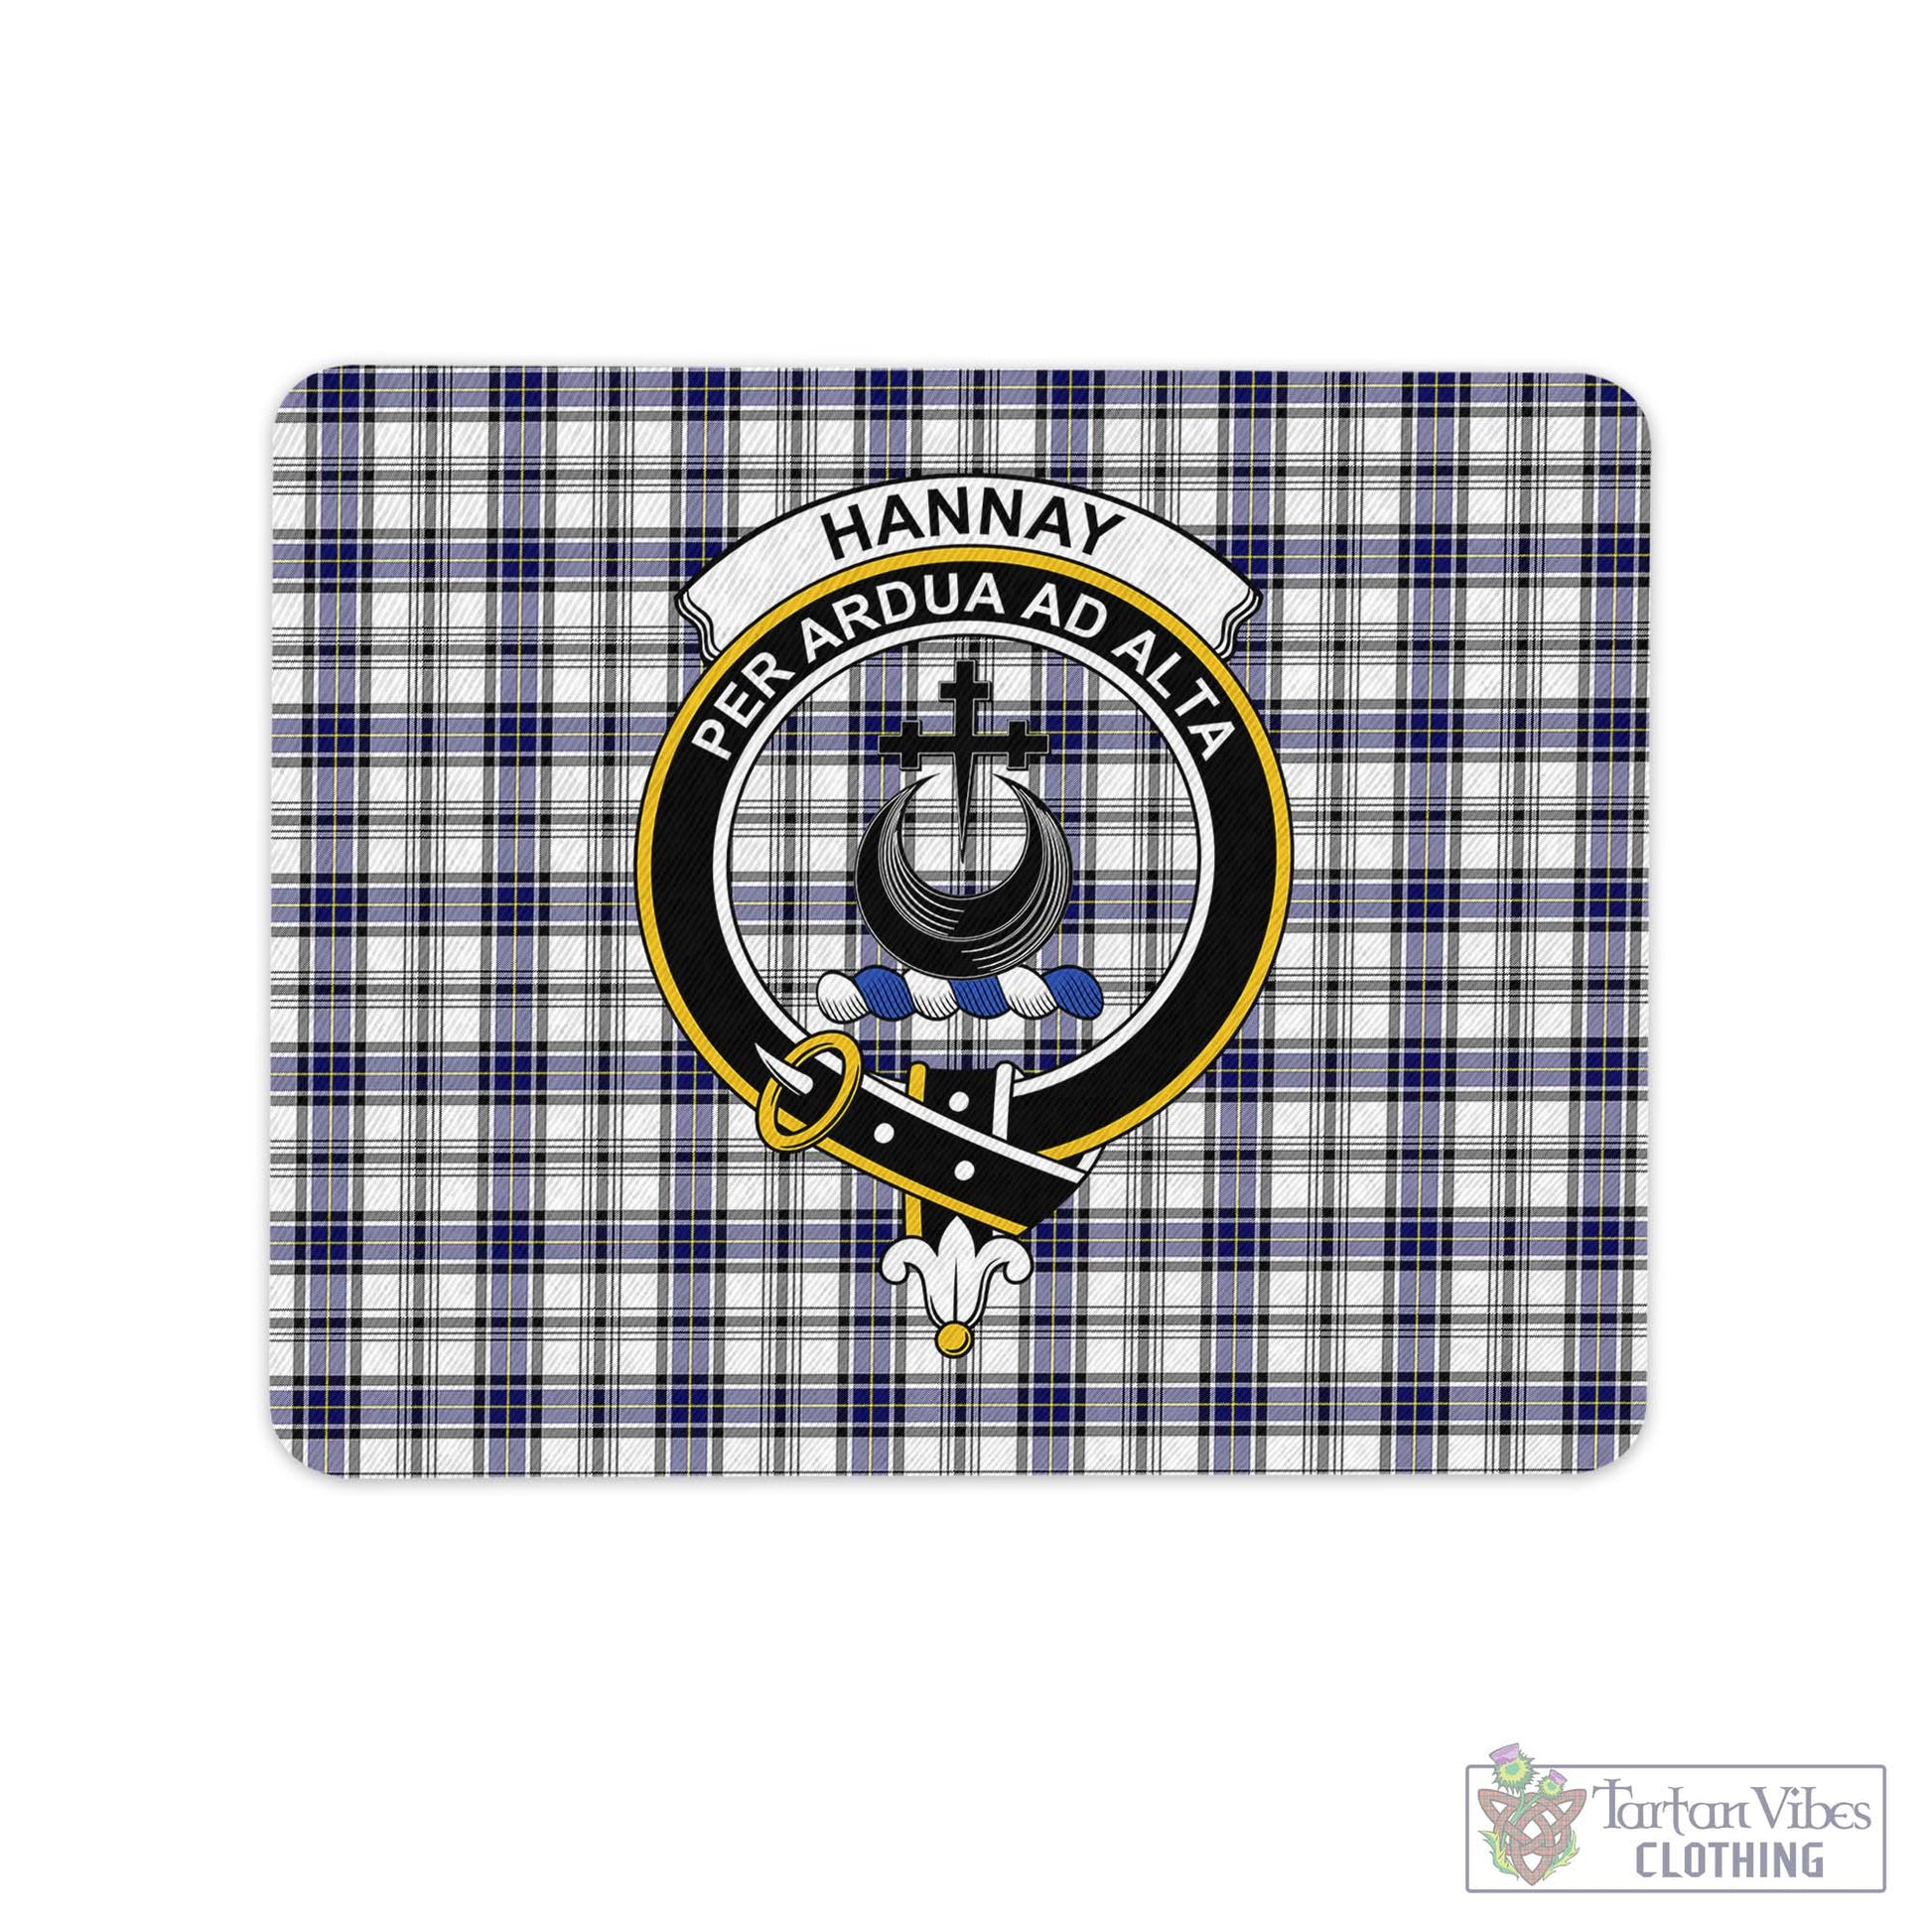 Tartan Vibes Clothing Hannay Modern Tartan Mouse Pad with Family Crest